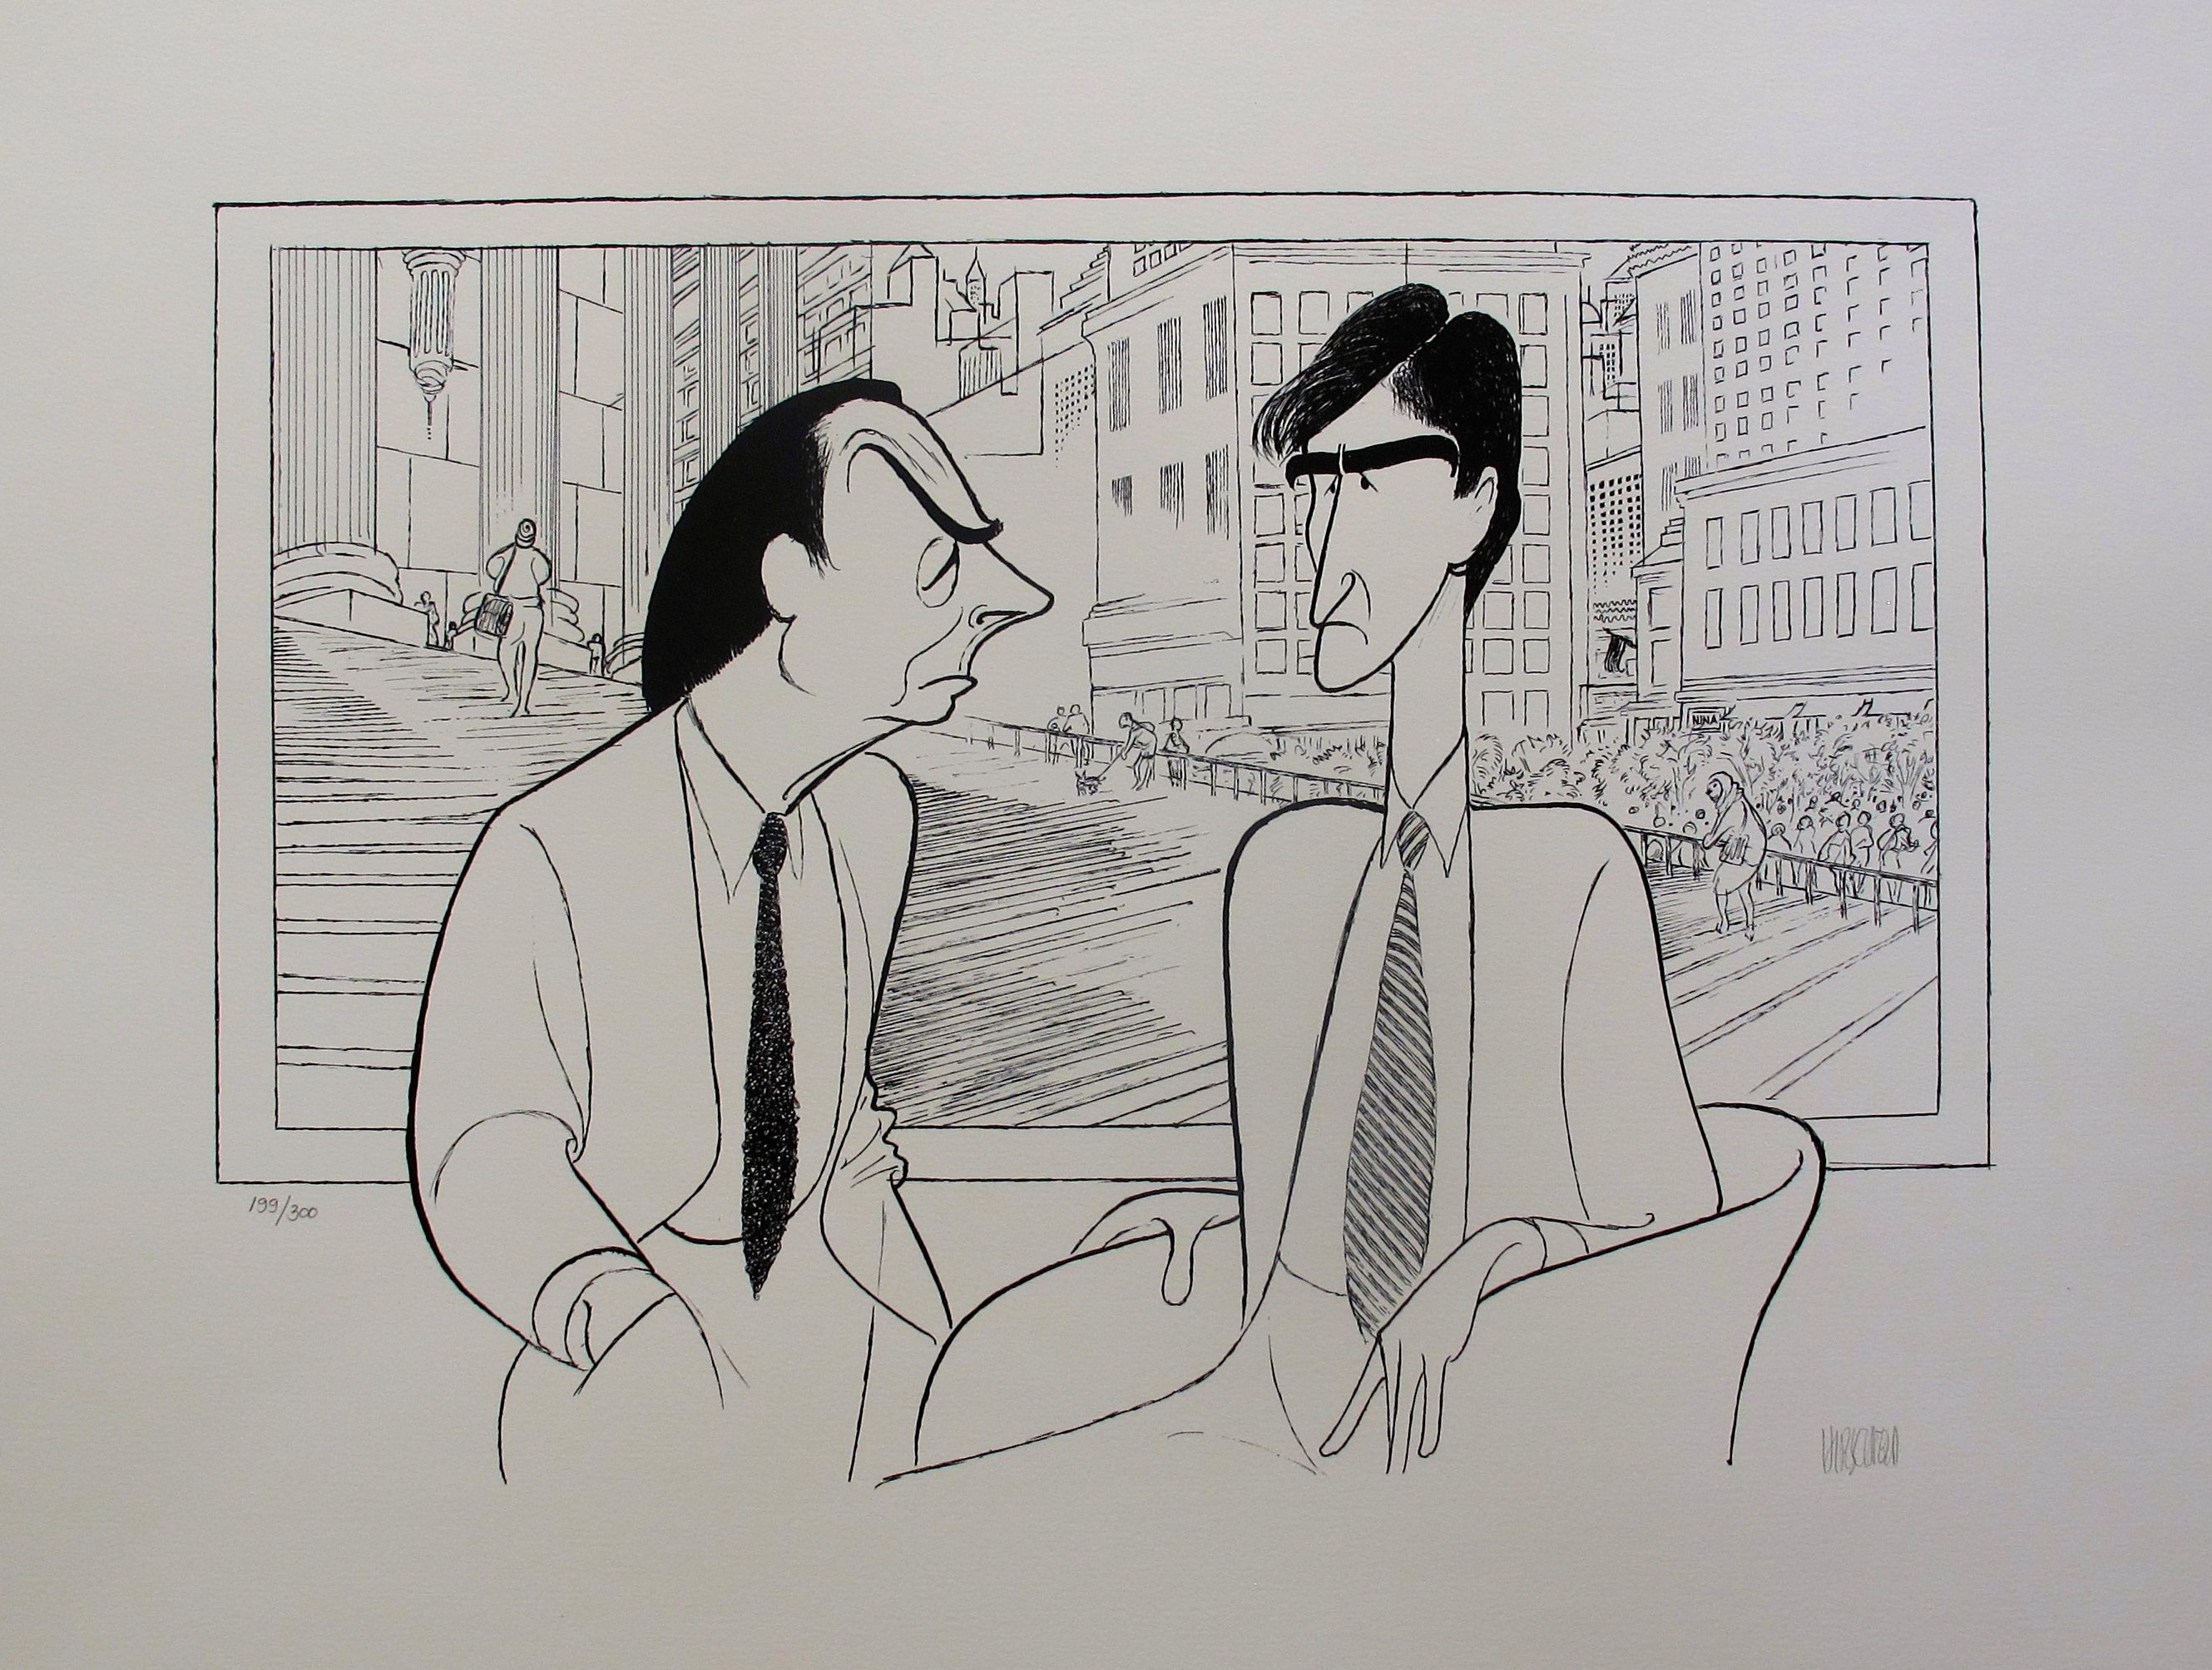 AL HIRSCHFELD "LAW & ORDER" Hand Signed Lithograph Jerry Orbach & Sam Waterston